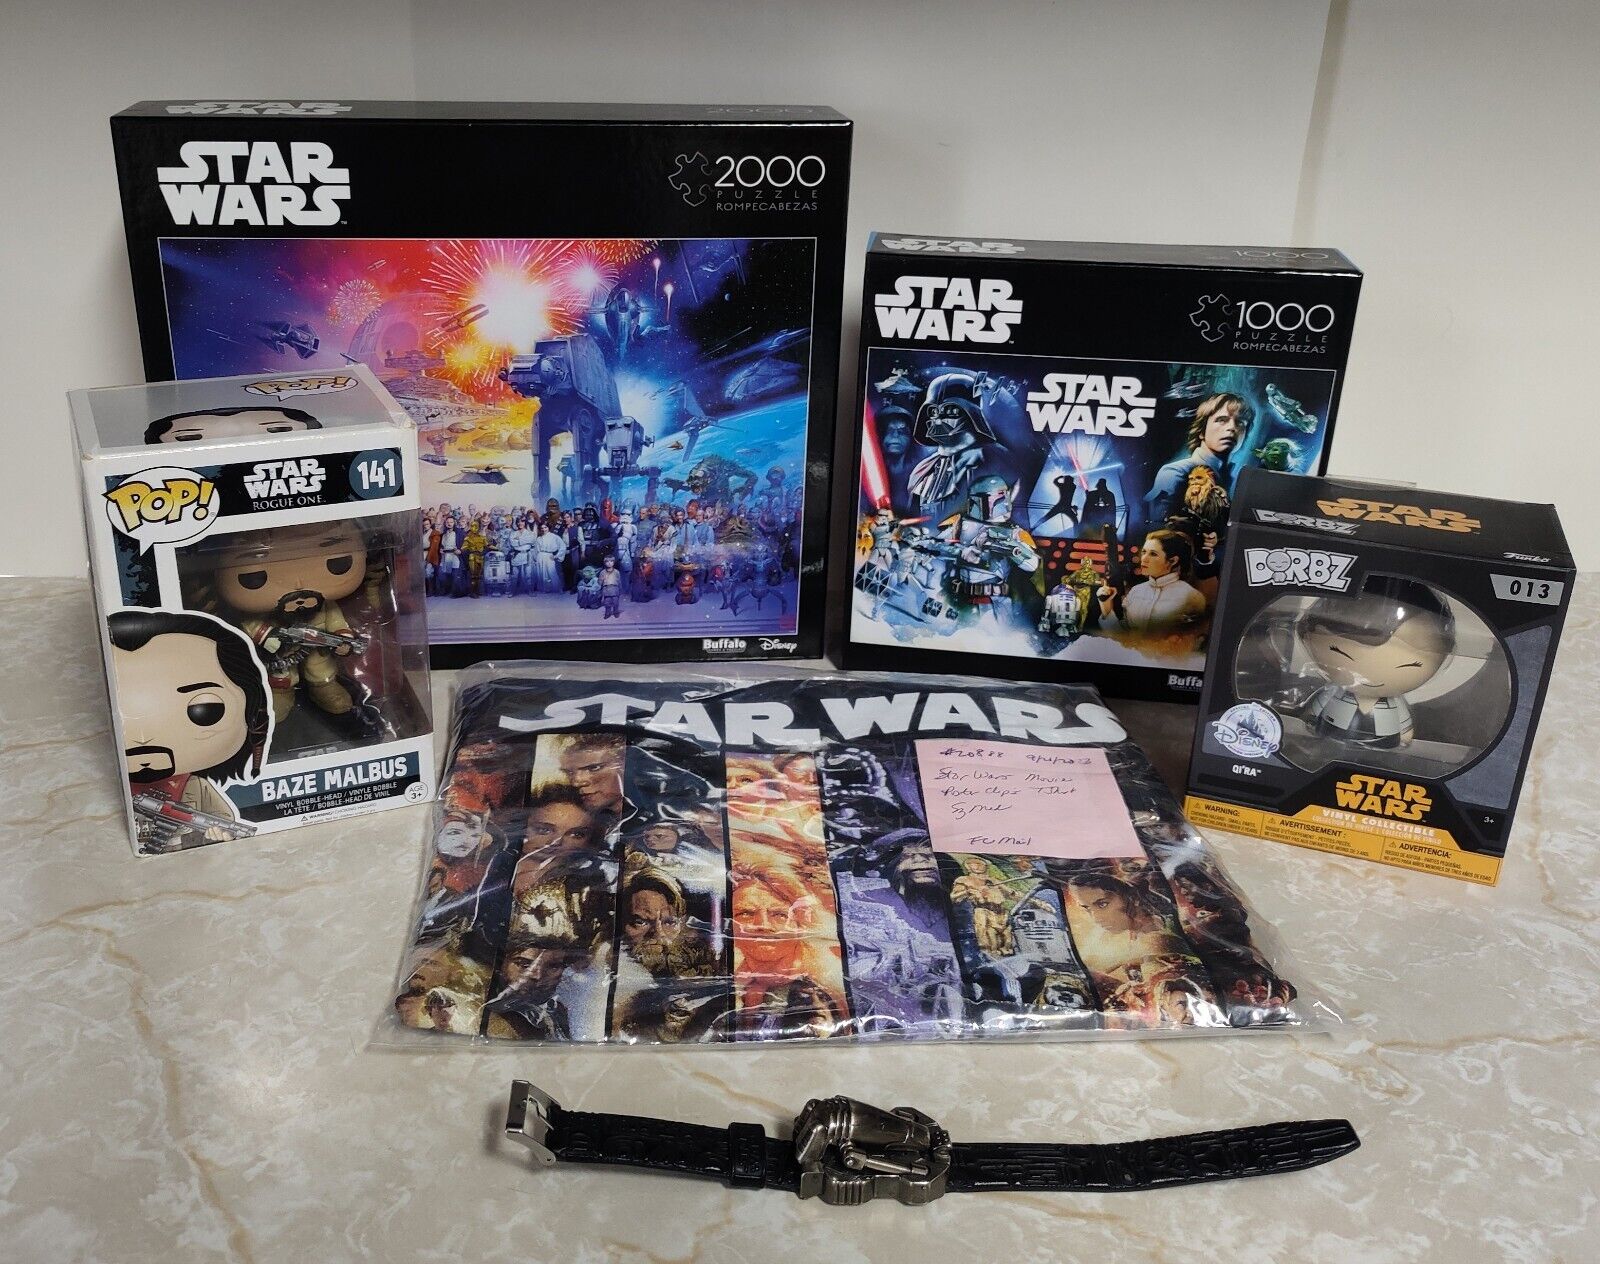 Star Wars Lot of 6 Items Watch T Shirt 2 Puzzles 2 Funko Pops Collectibles